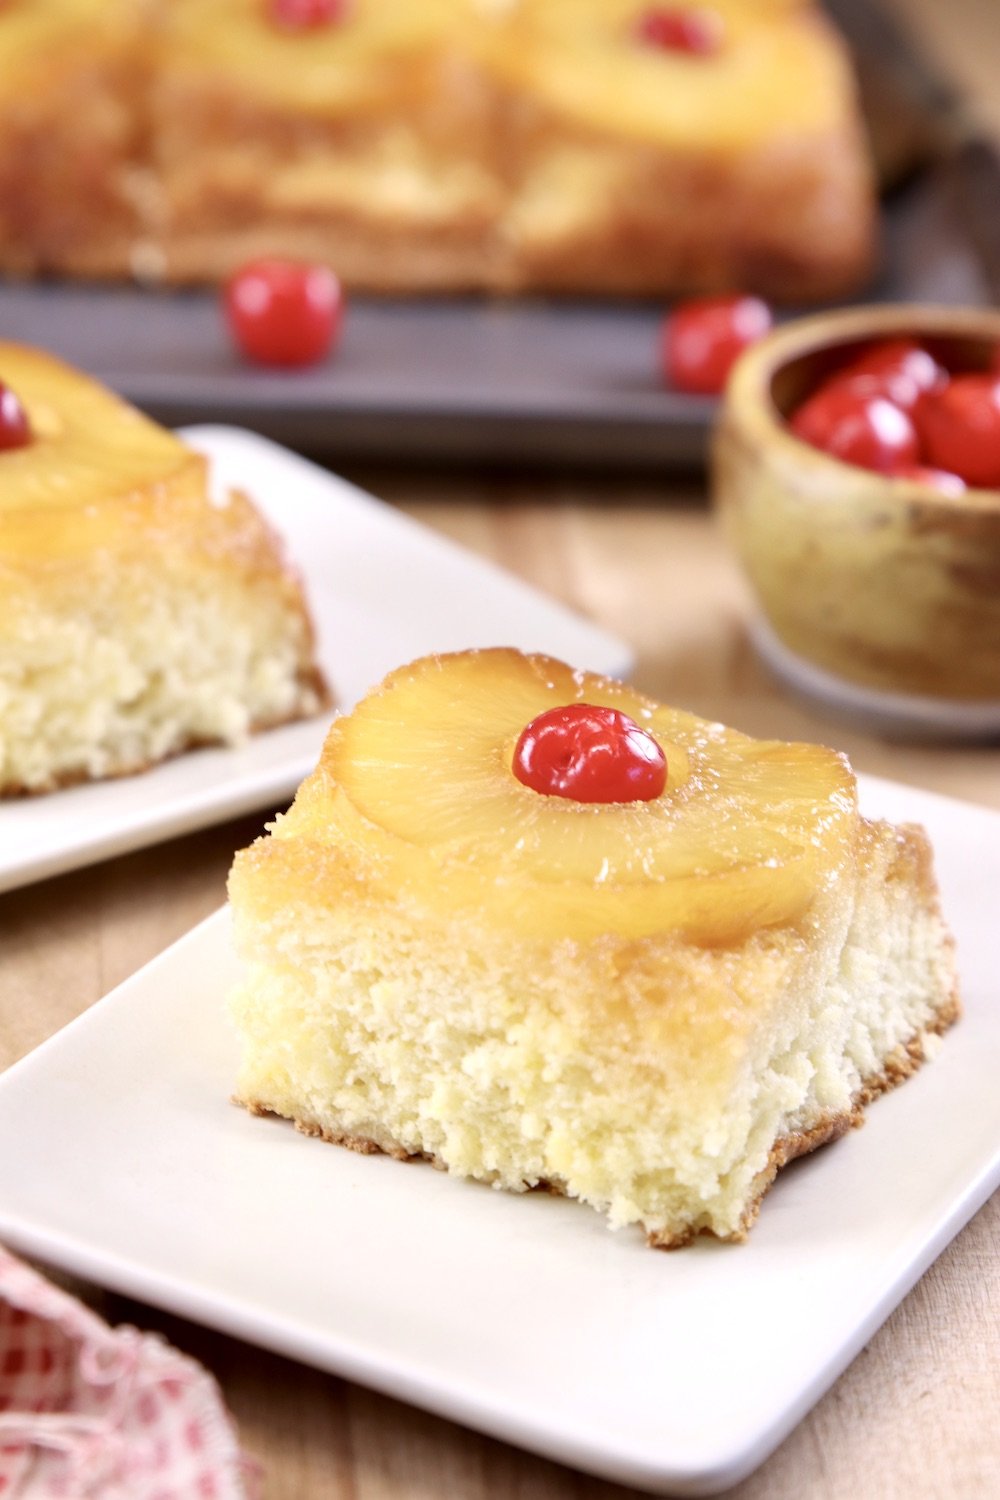 Slice of pineapple upside down cake on a small plate, bowl of cherries, platter of cake in background